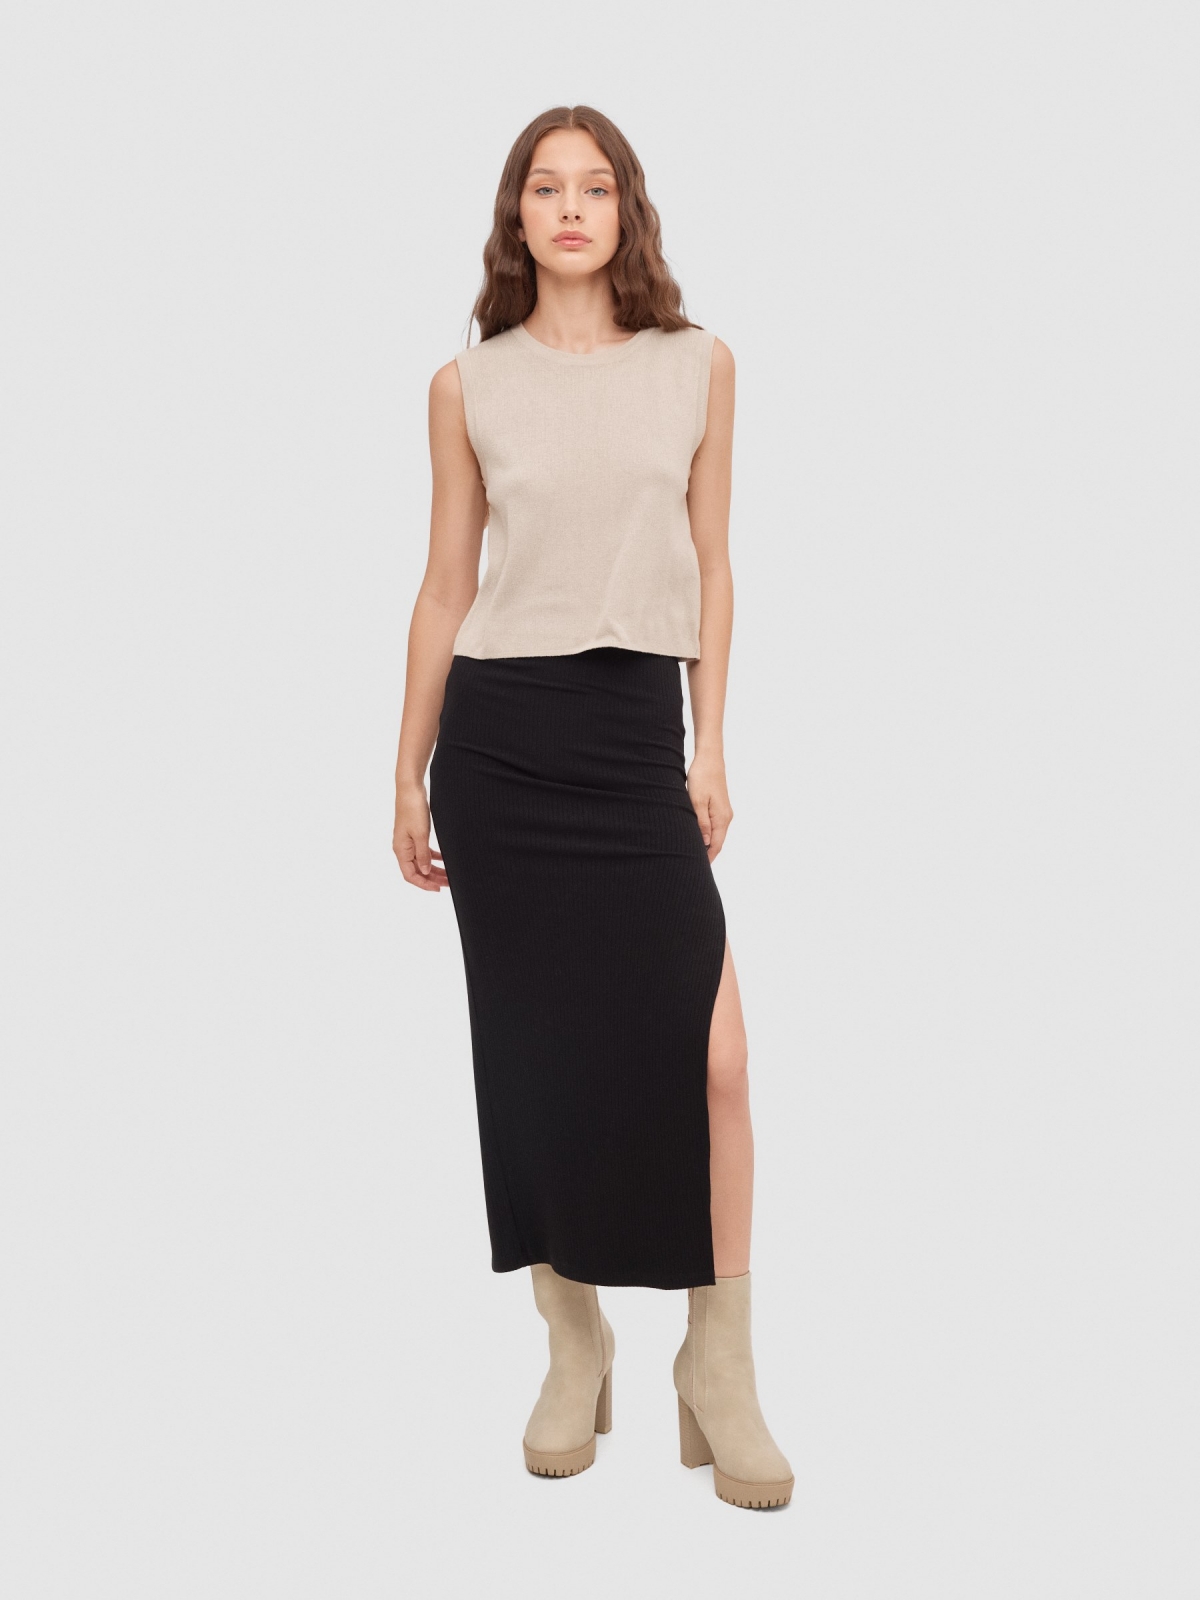 Ribbed midi skirt black middle front view